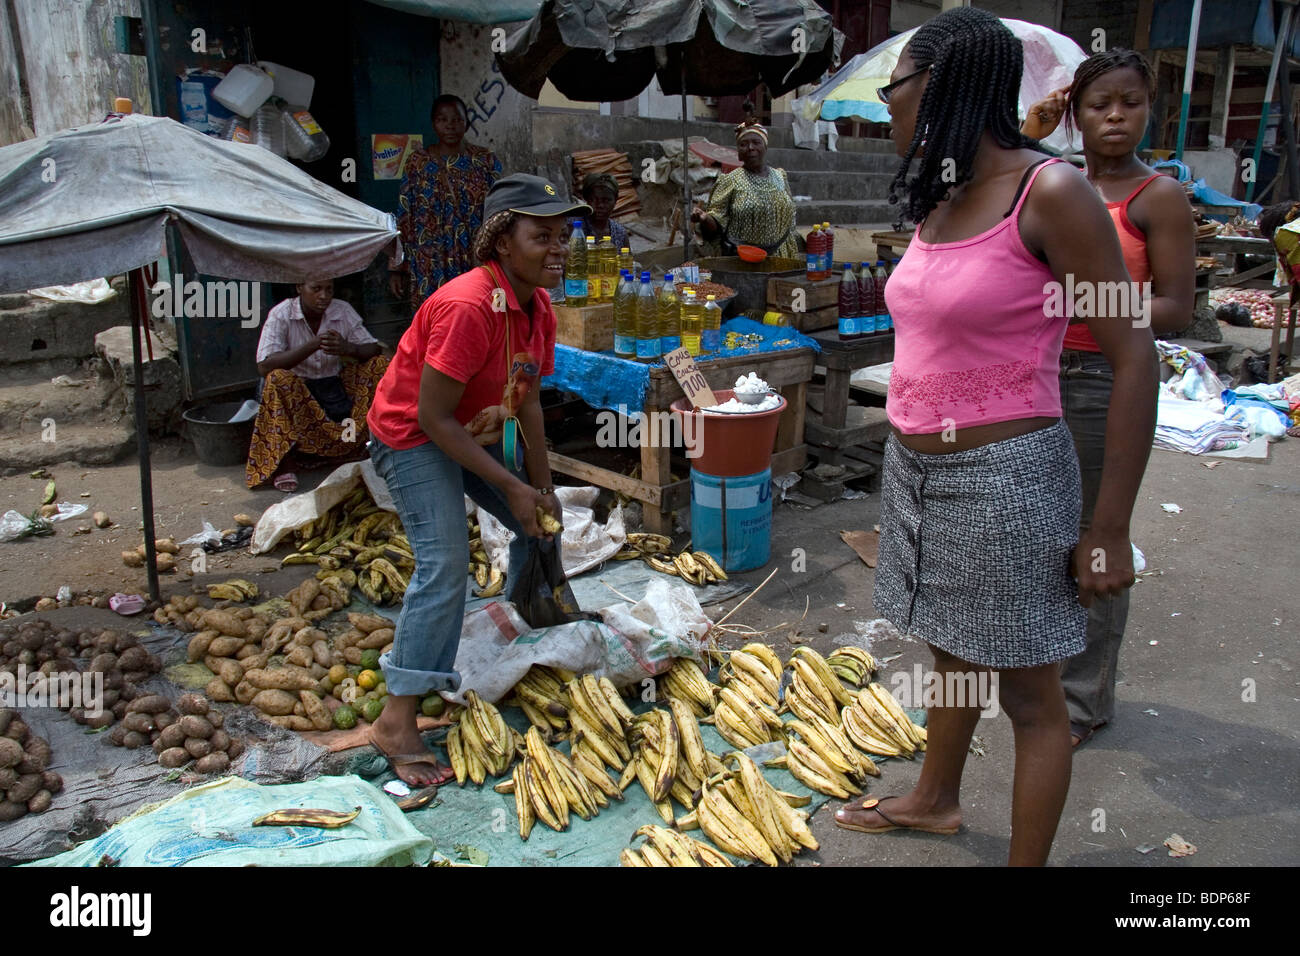 Street market in poor neighborhood of Grand Moulin Douala Cameroon West Africa with stalls selling plantain yam cooking oil Stock Photo